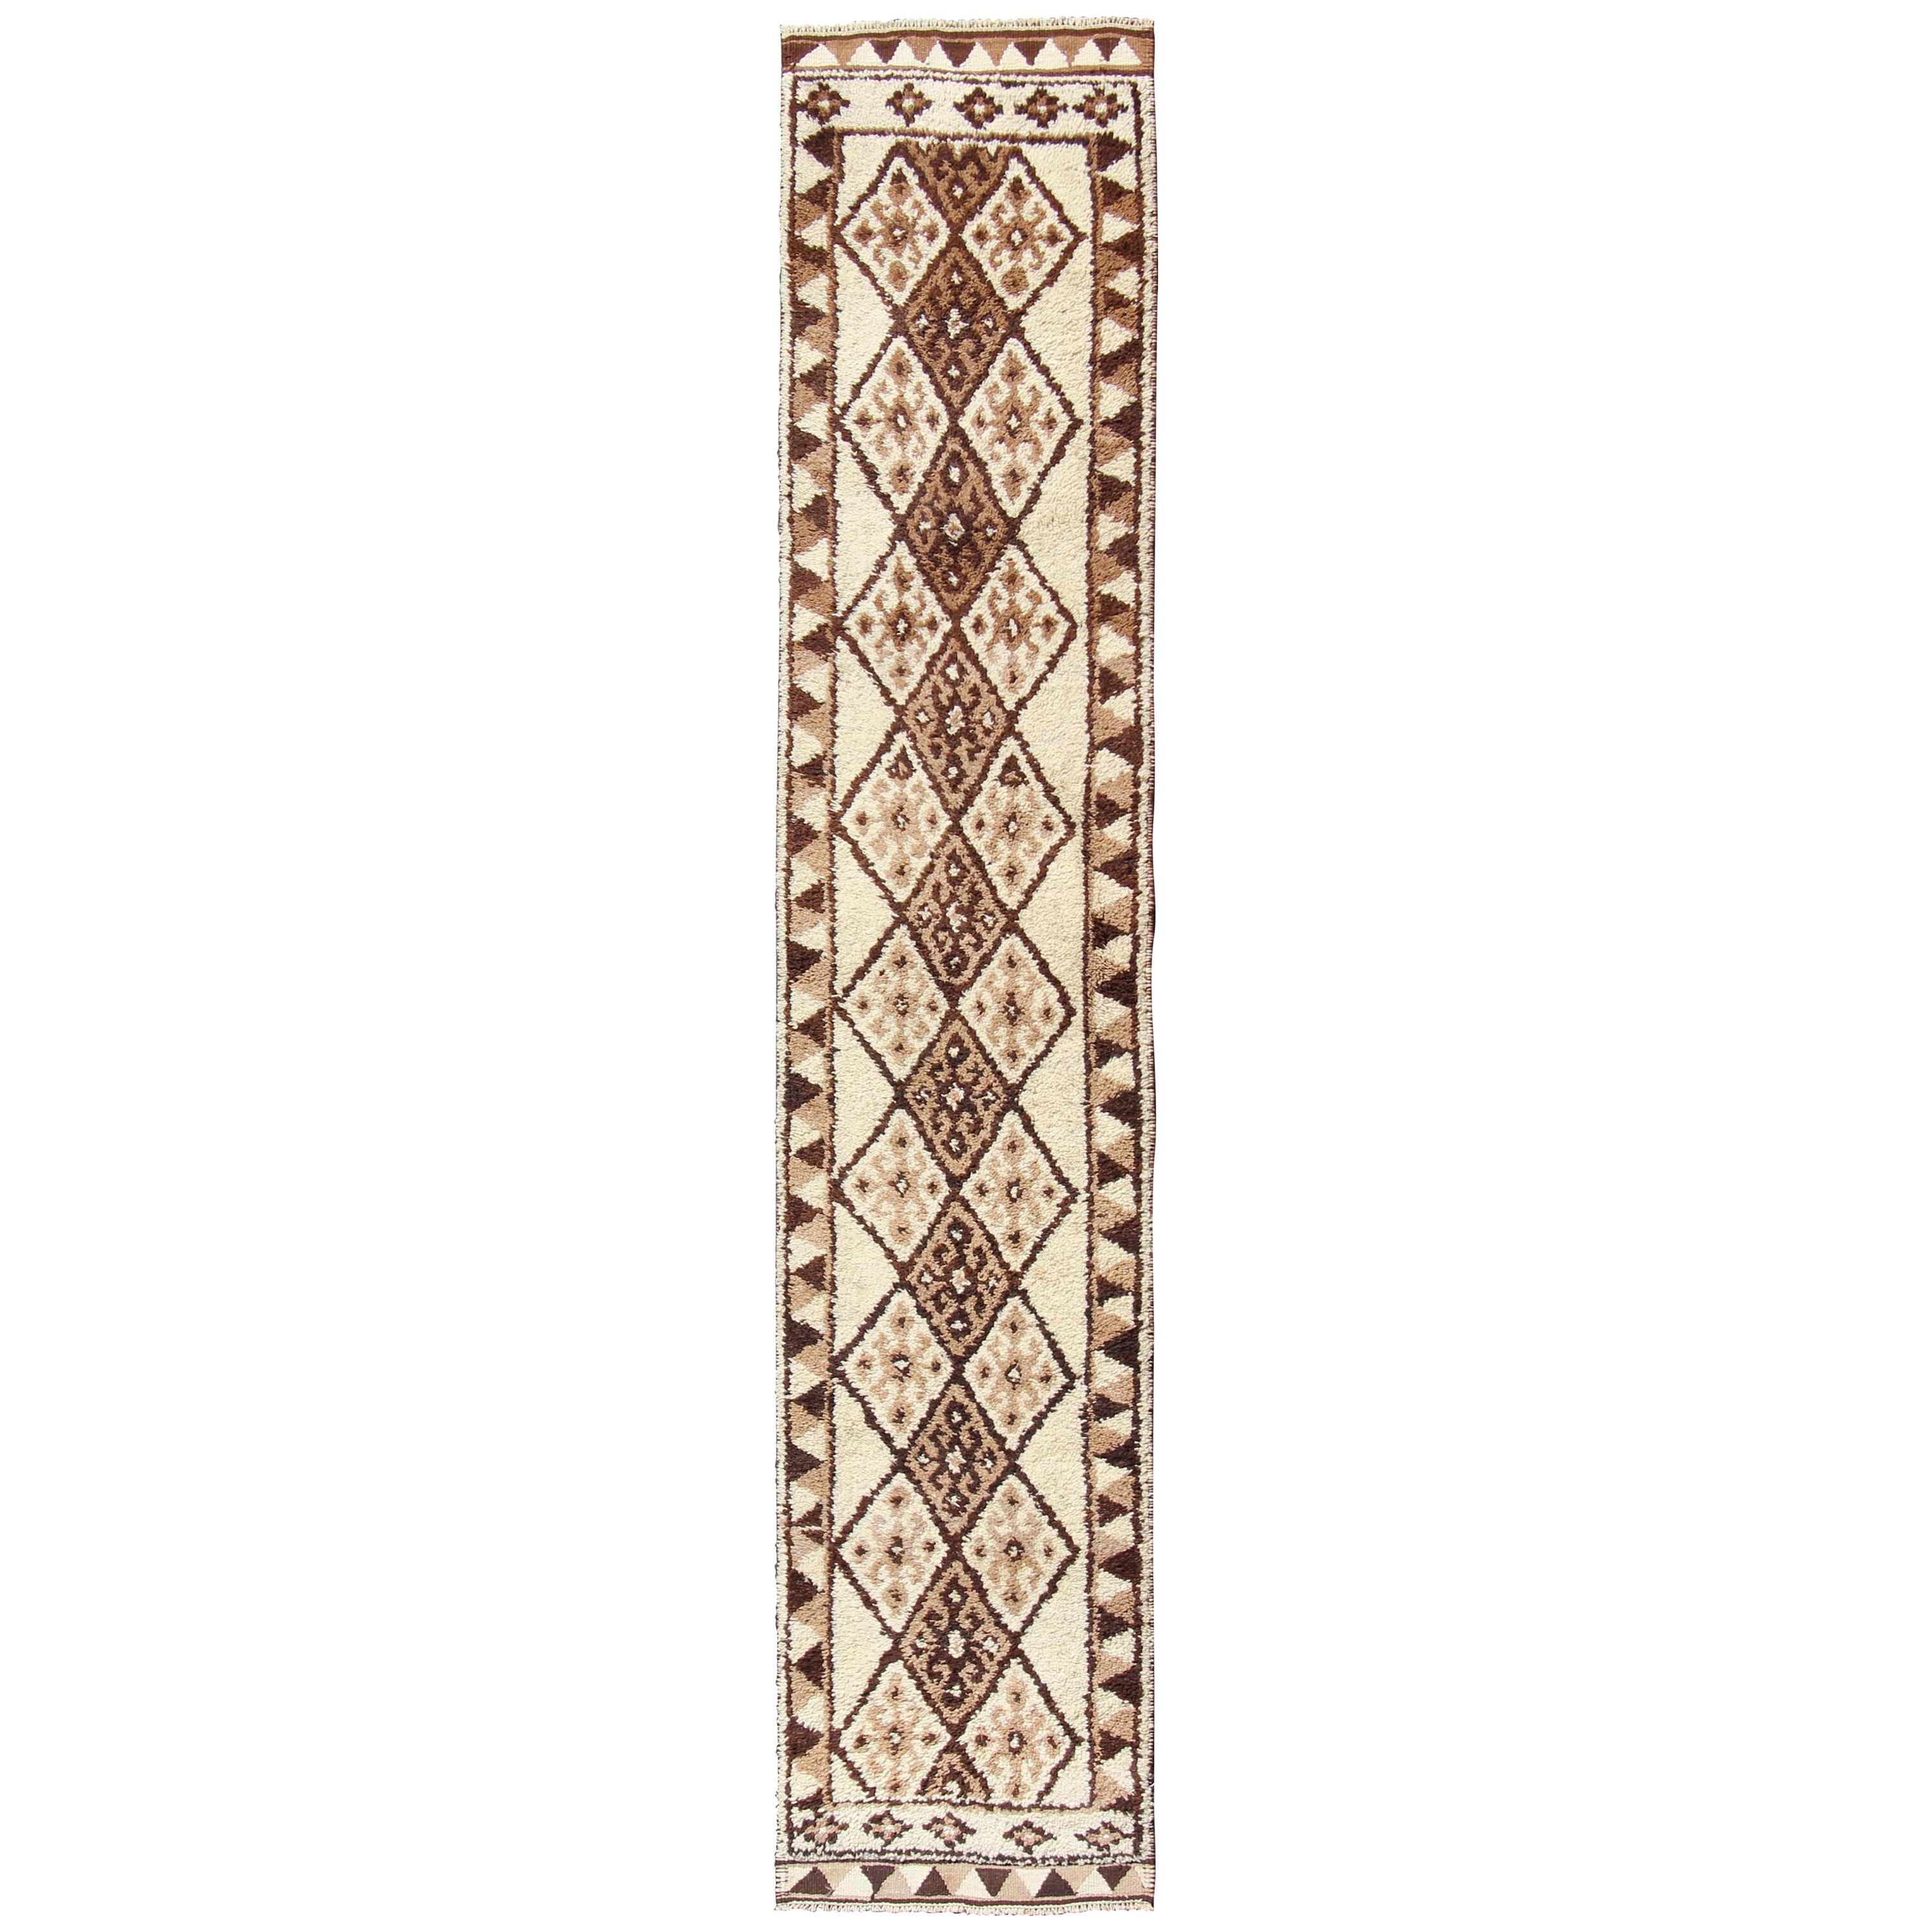 Vintage Turkish Tulu Runner with Diamond Design in Cream, Brown, and Taupe